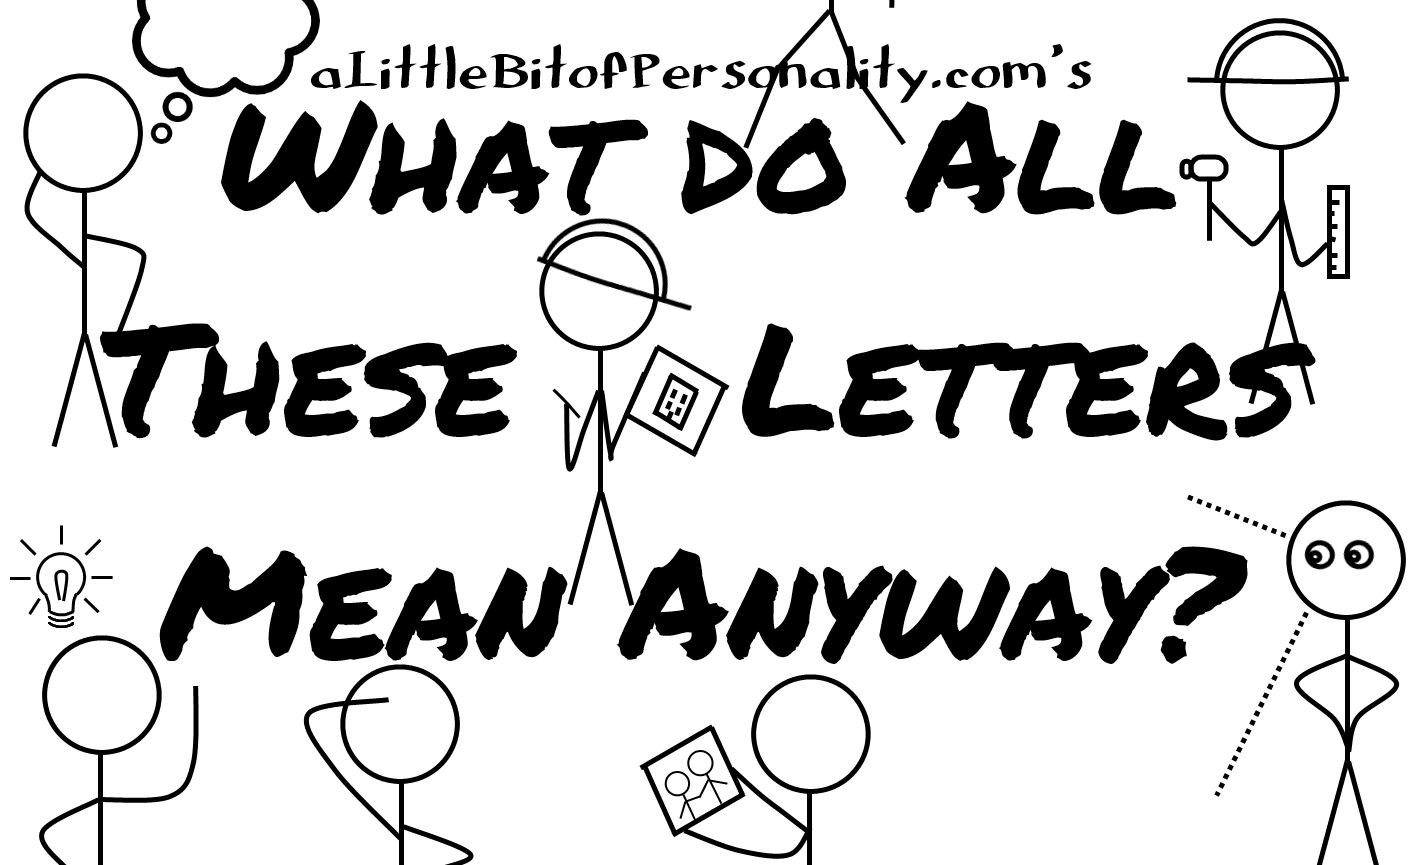 https://www.alittlebitofpersonality.com/wp-content/uploads/2014/01/What-Do-All-These-Letters-Mean-Anyway.png